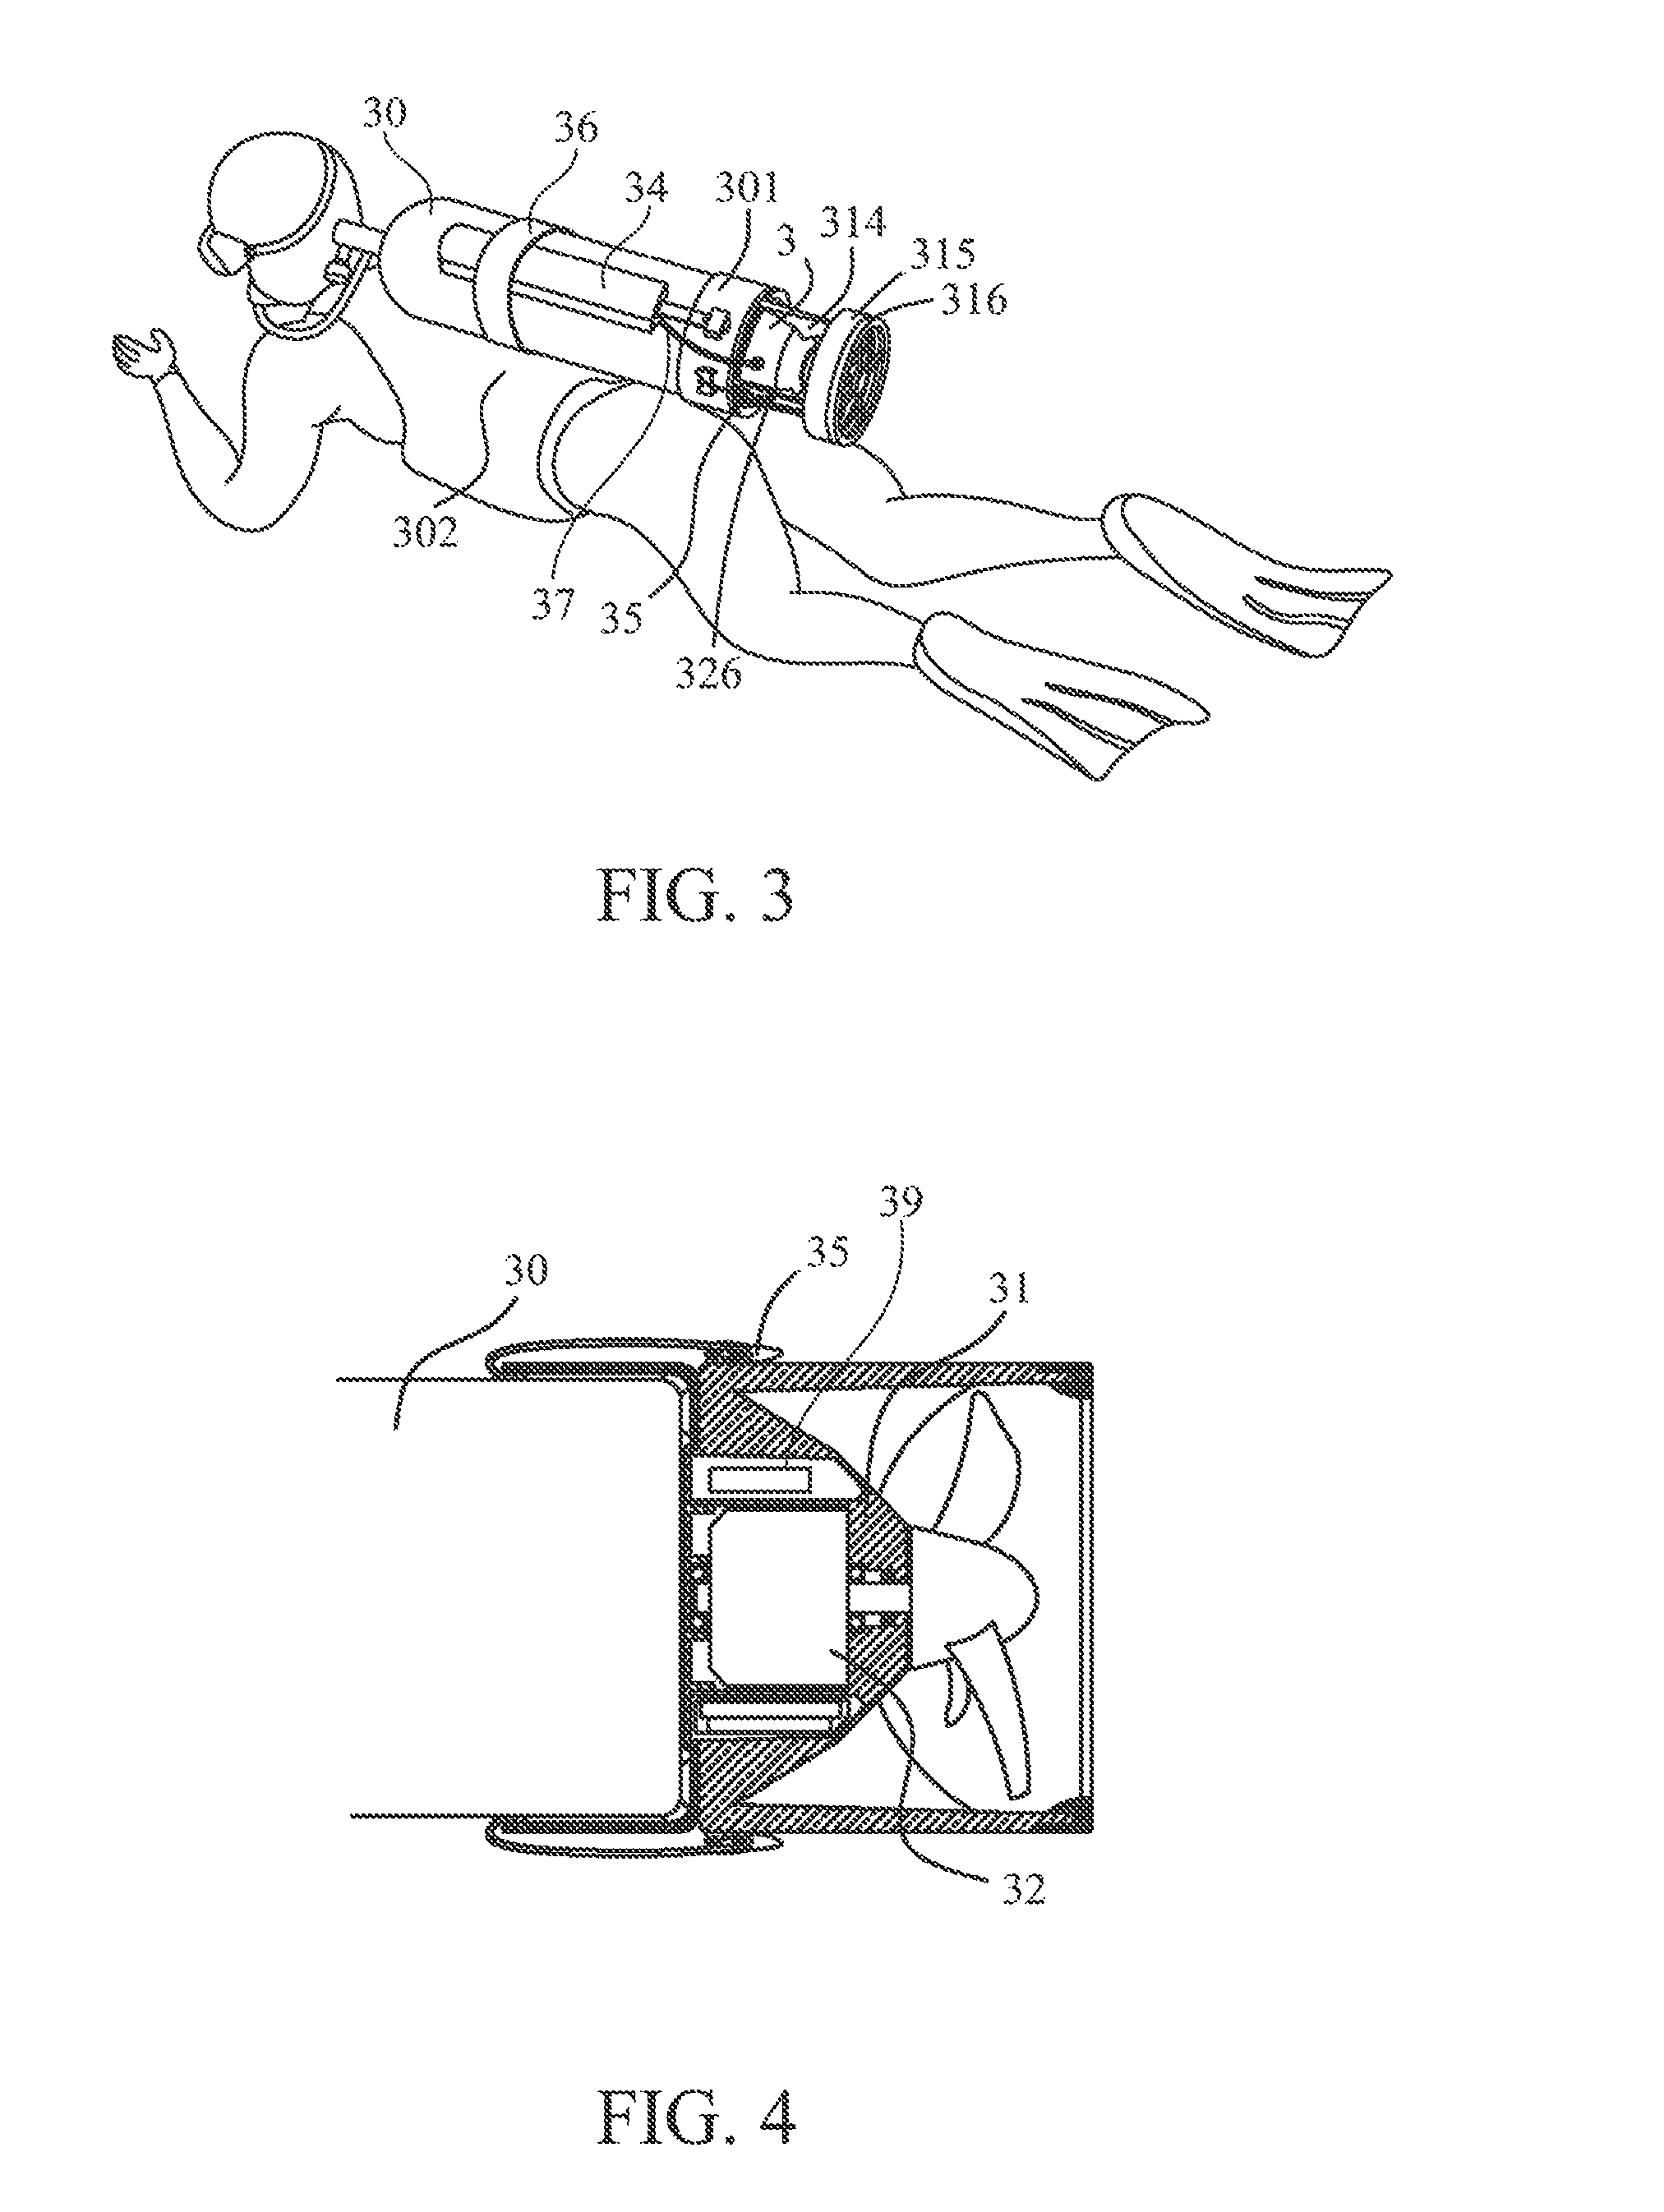 Electrical Forward-Moving Assistant Apparatus